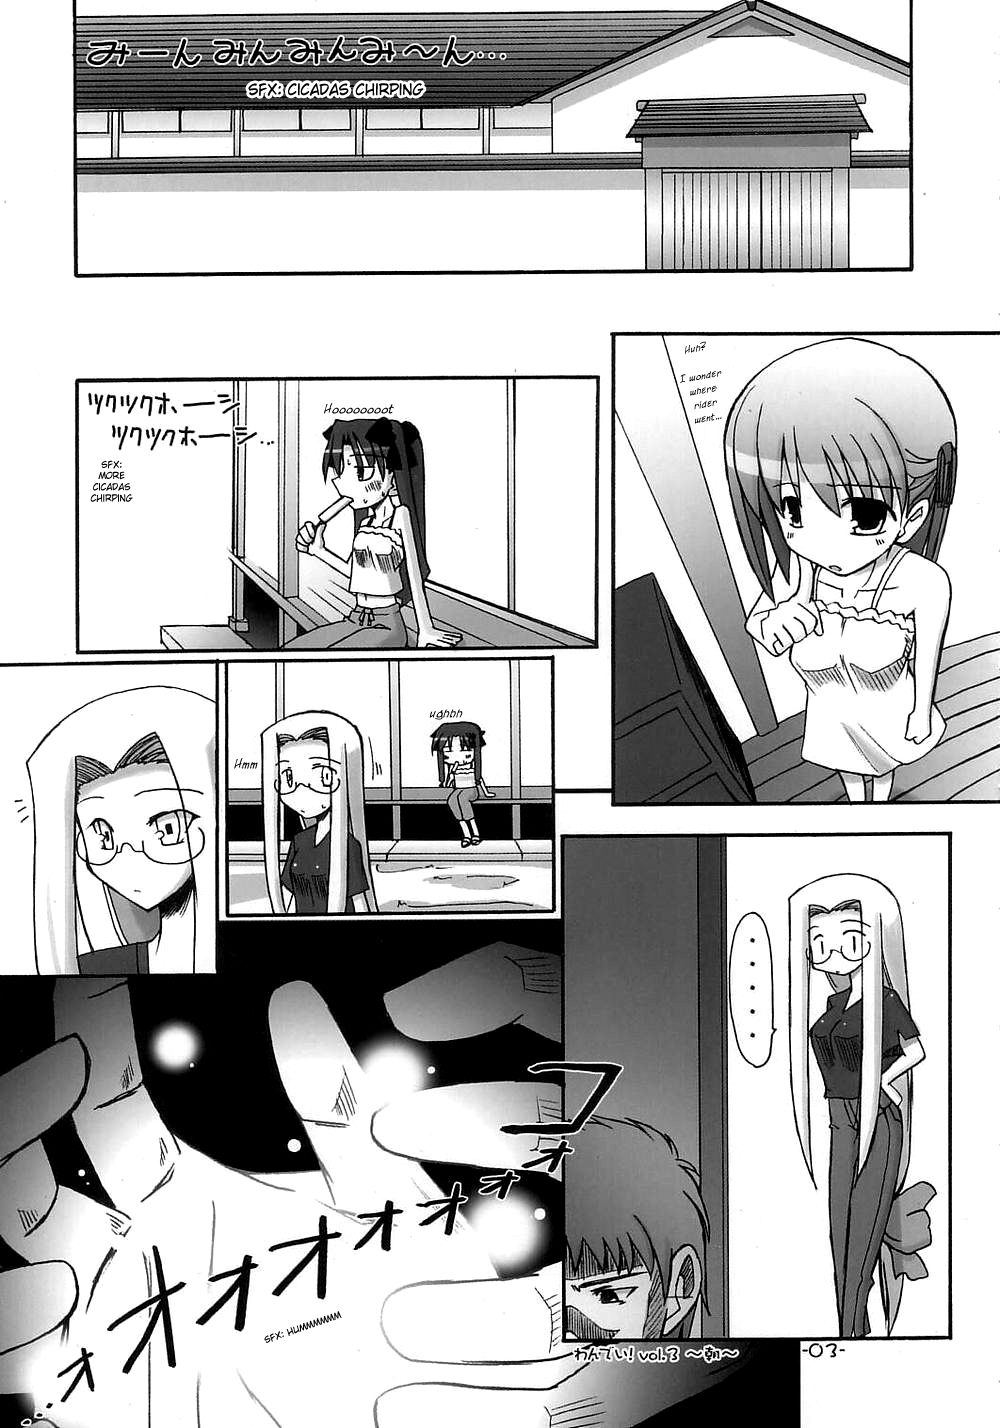 (C68) [Ronpaia (Fue)] One Day! vol. 3 (Fate/stay night) [English] 3